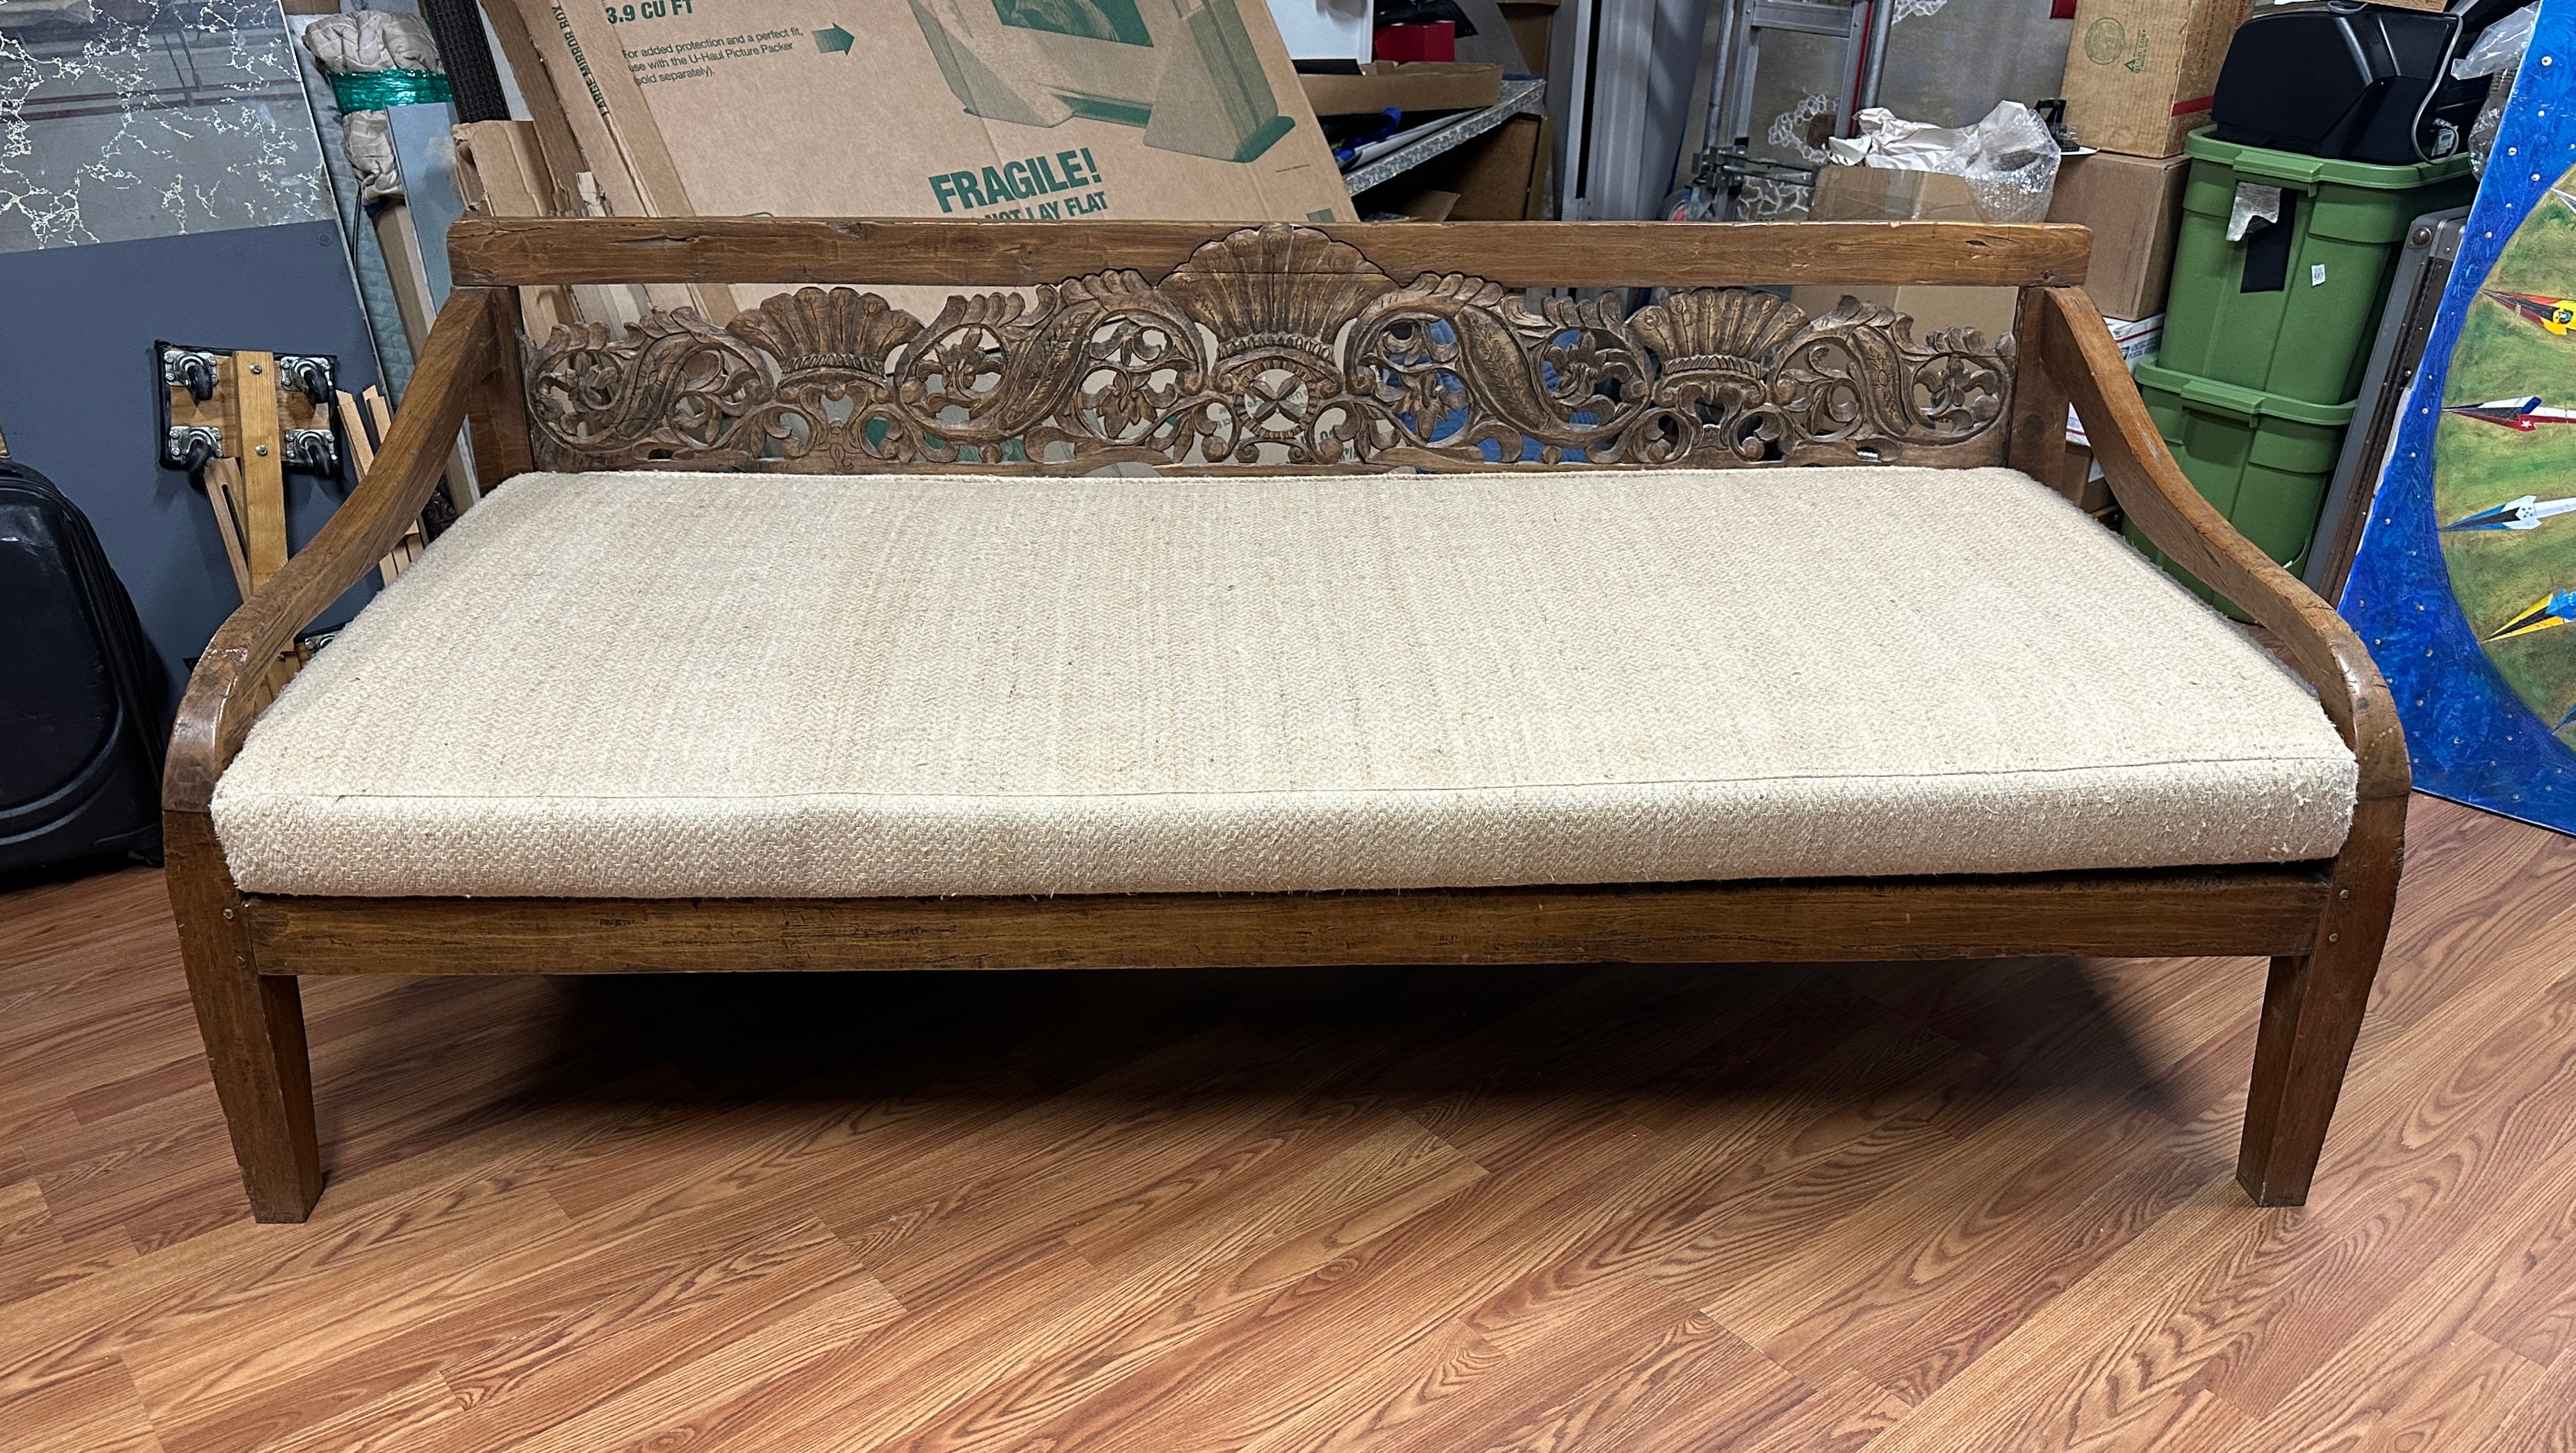 A lovely carved teak daybed sofa likely Indonesian or Balinese. Nice old teak likely antique reclaimed wood. We just acquired it out of a magnificent Palm Springs estate along with some beautiful custom pieces and Michael Taylor and Rose Tarlow